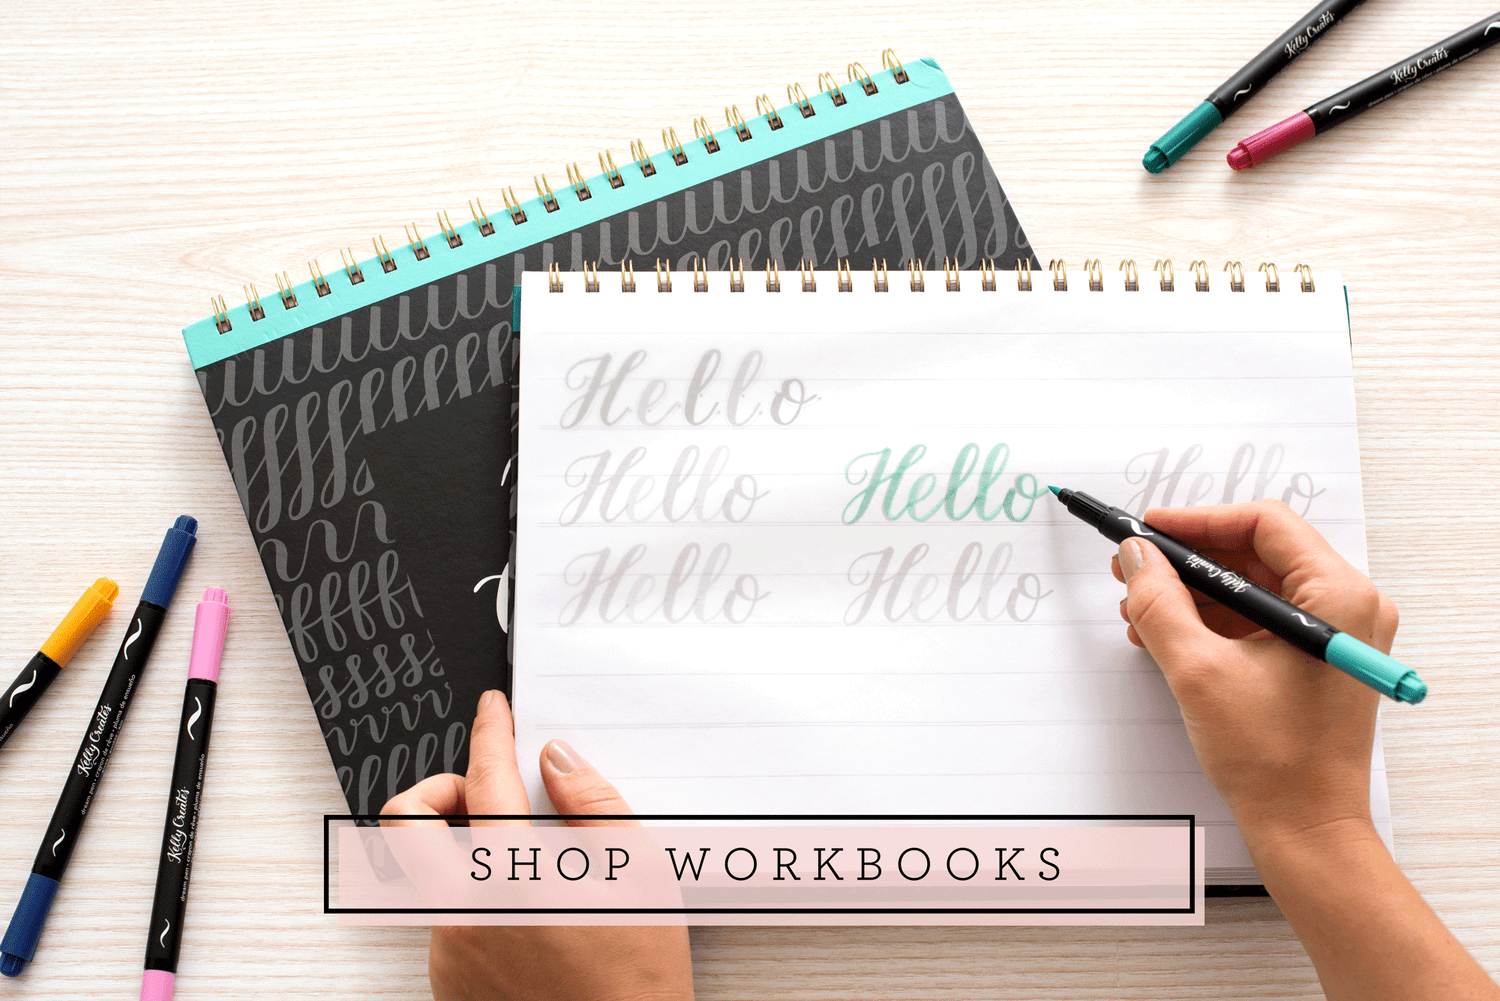 Brush Lettering with Sharpie Brush Markers – Kelly Creates